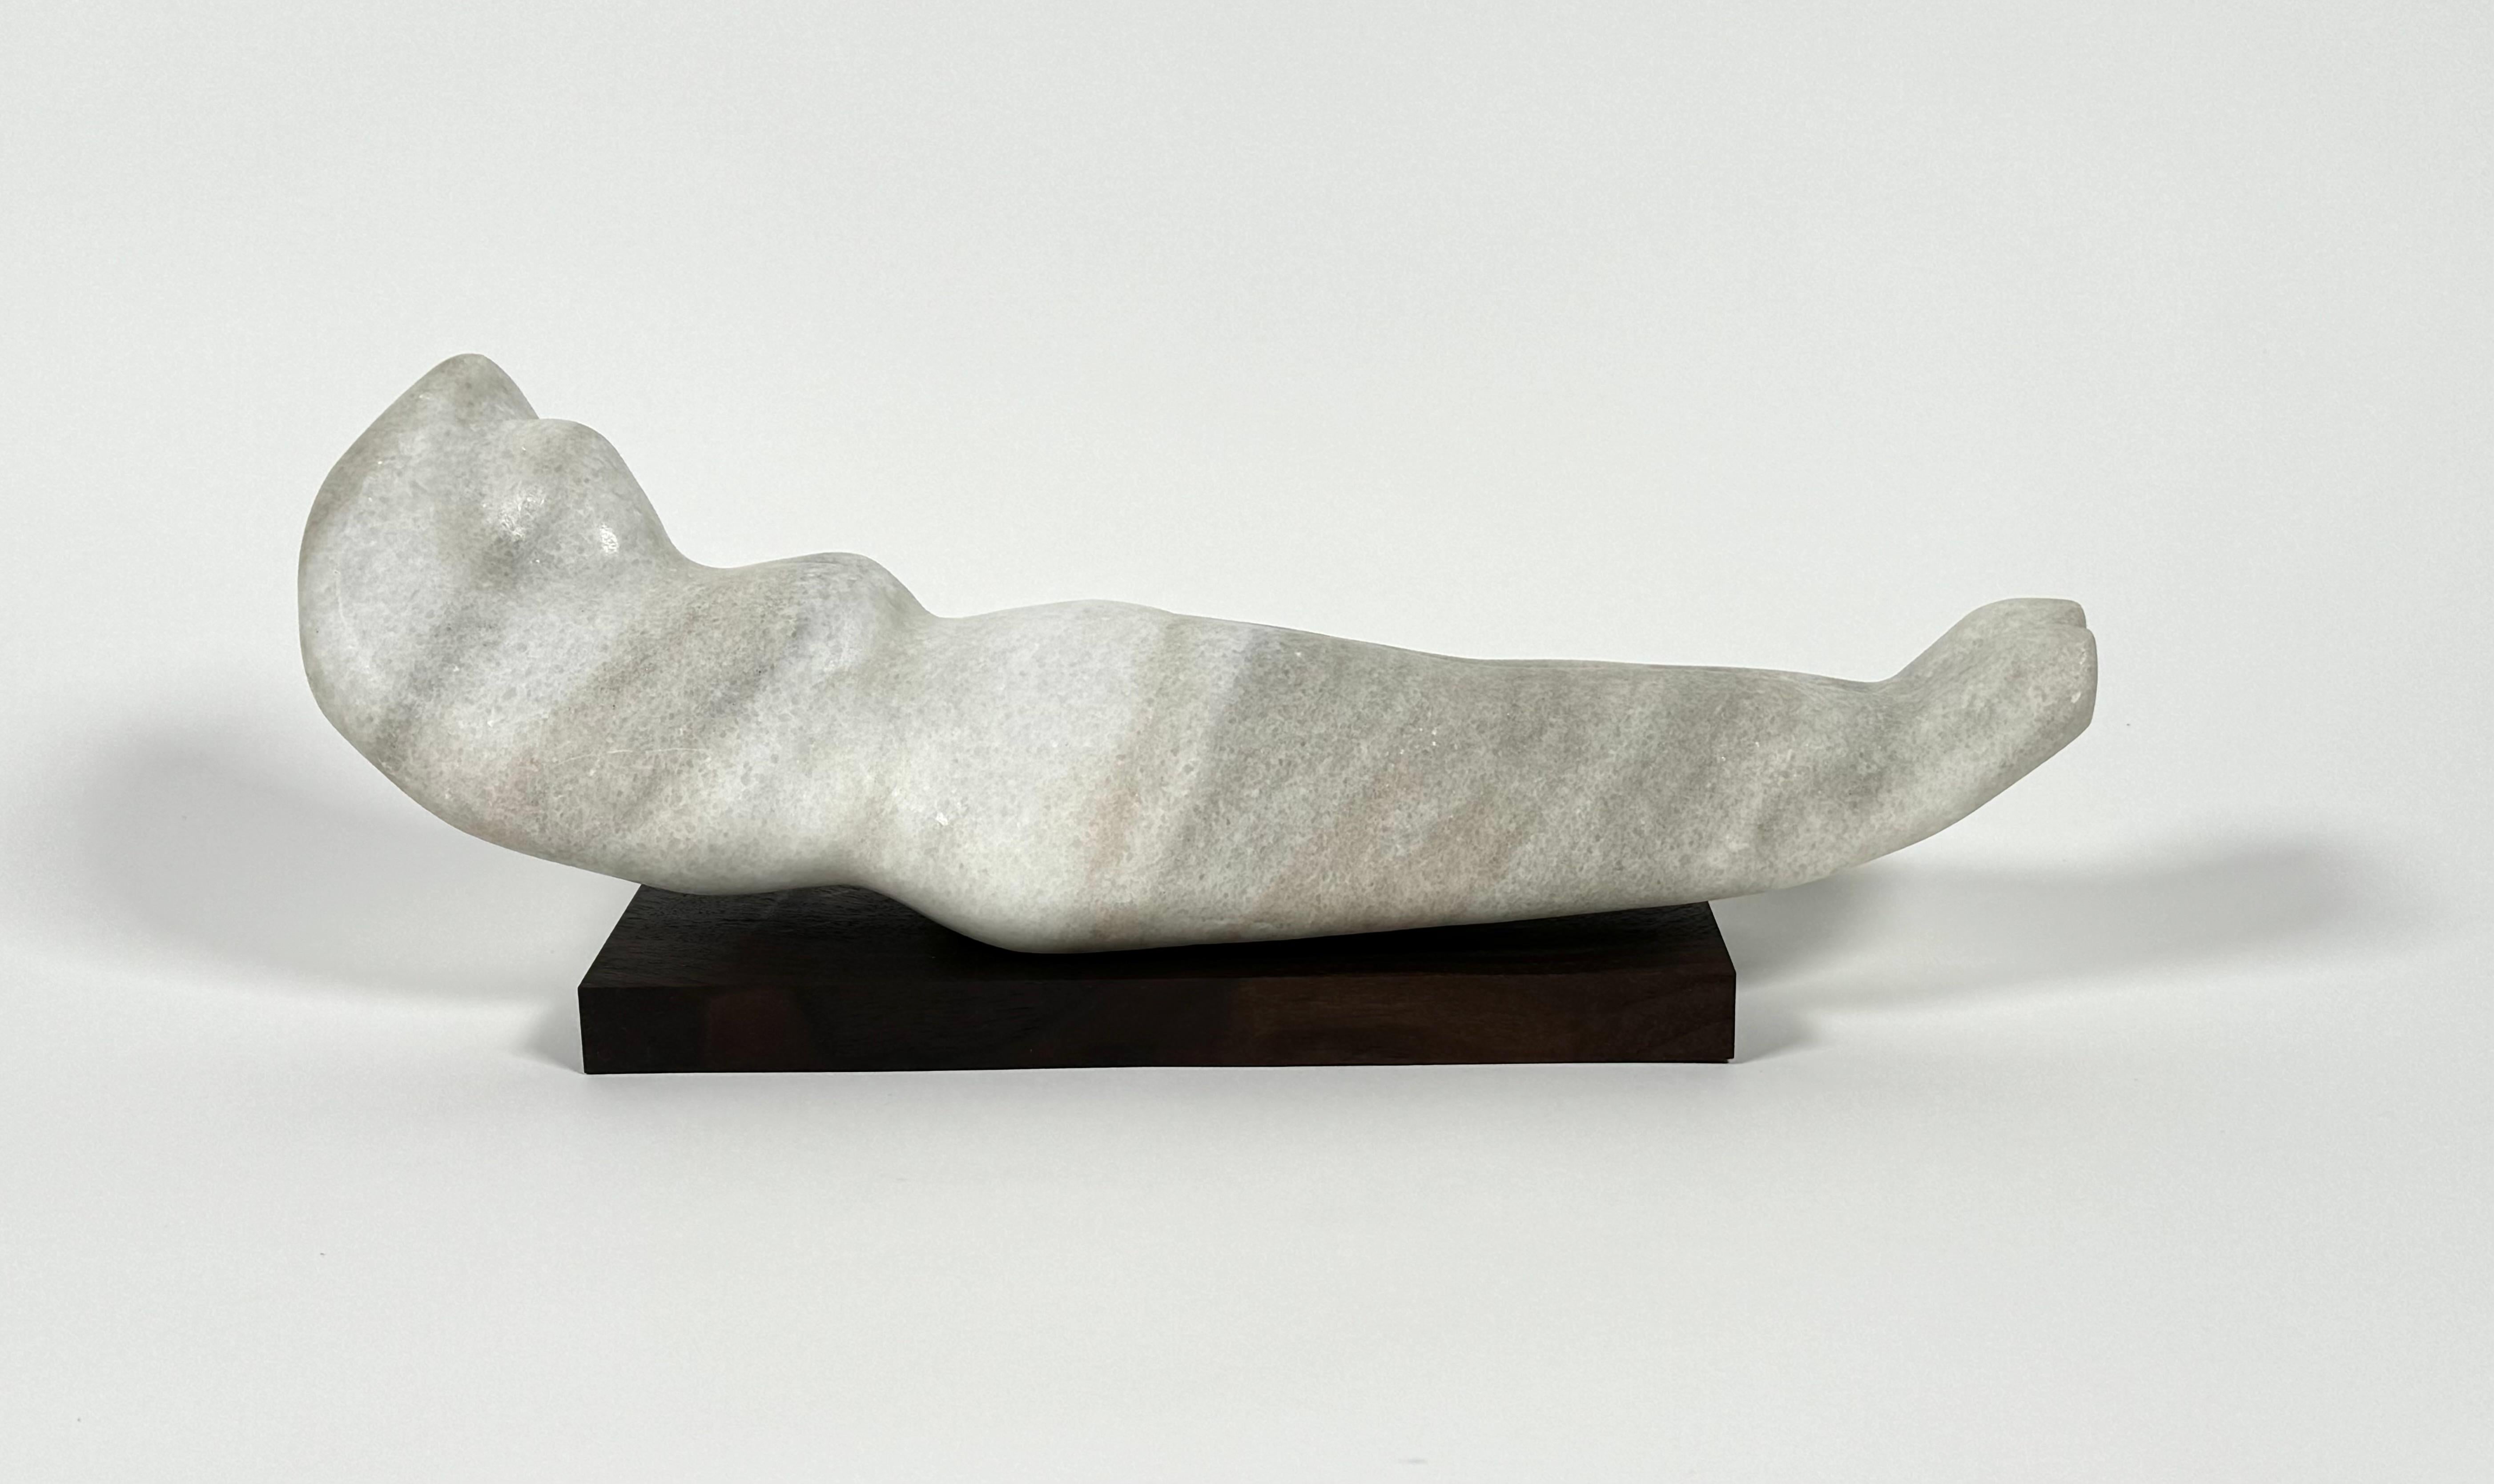 Abstract figurative sculpture in marble on a walnut base, a naive study of the female form, possibly a student of art work. The reclining form resting on a black walnut plinth base, the marble has some light graining of gray against the off white.